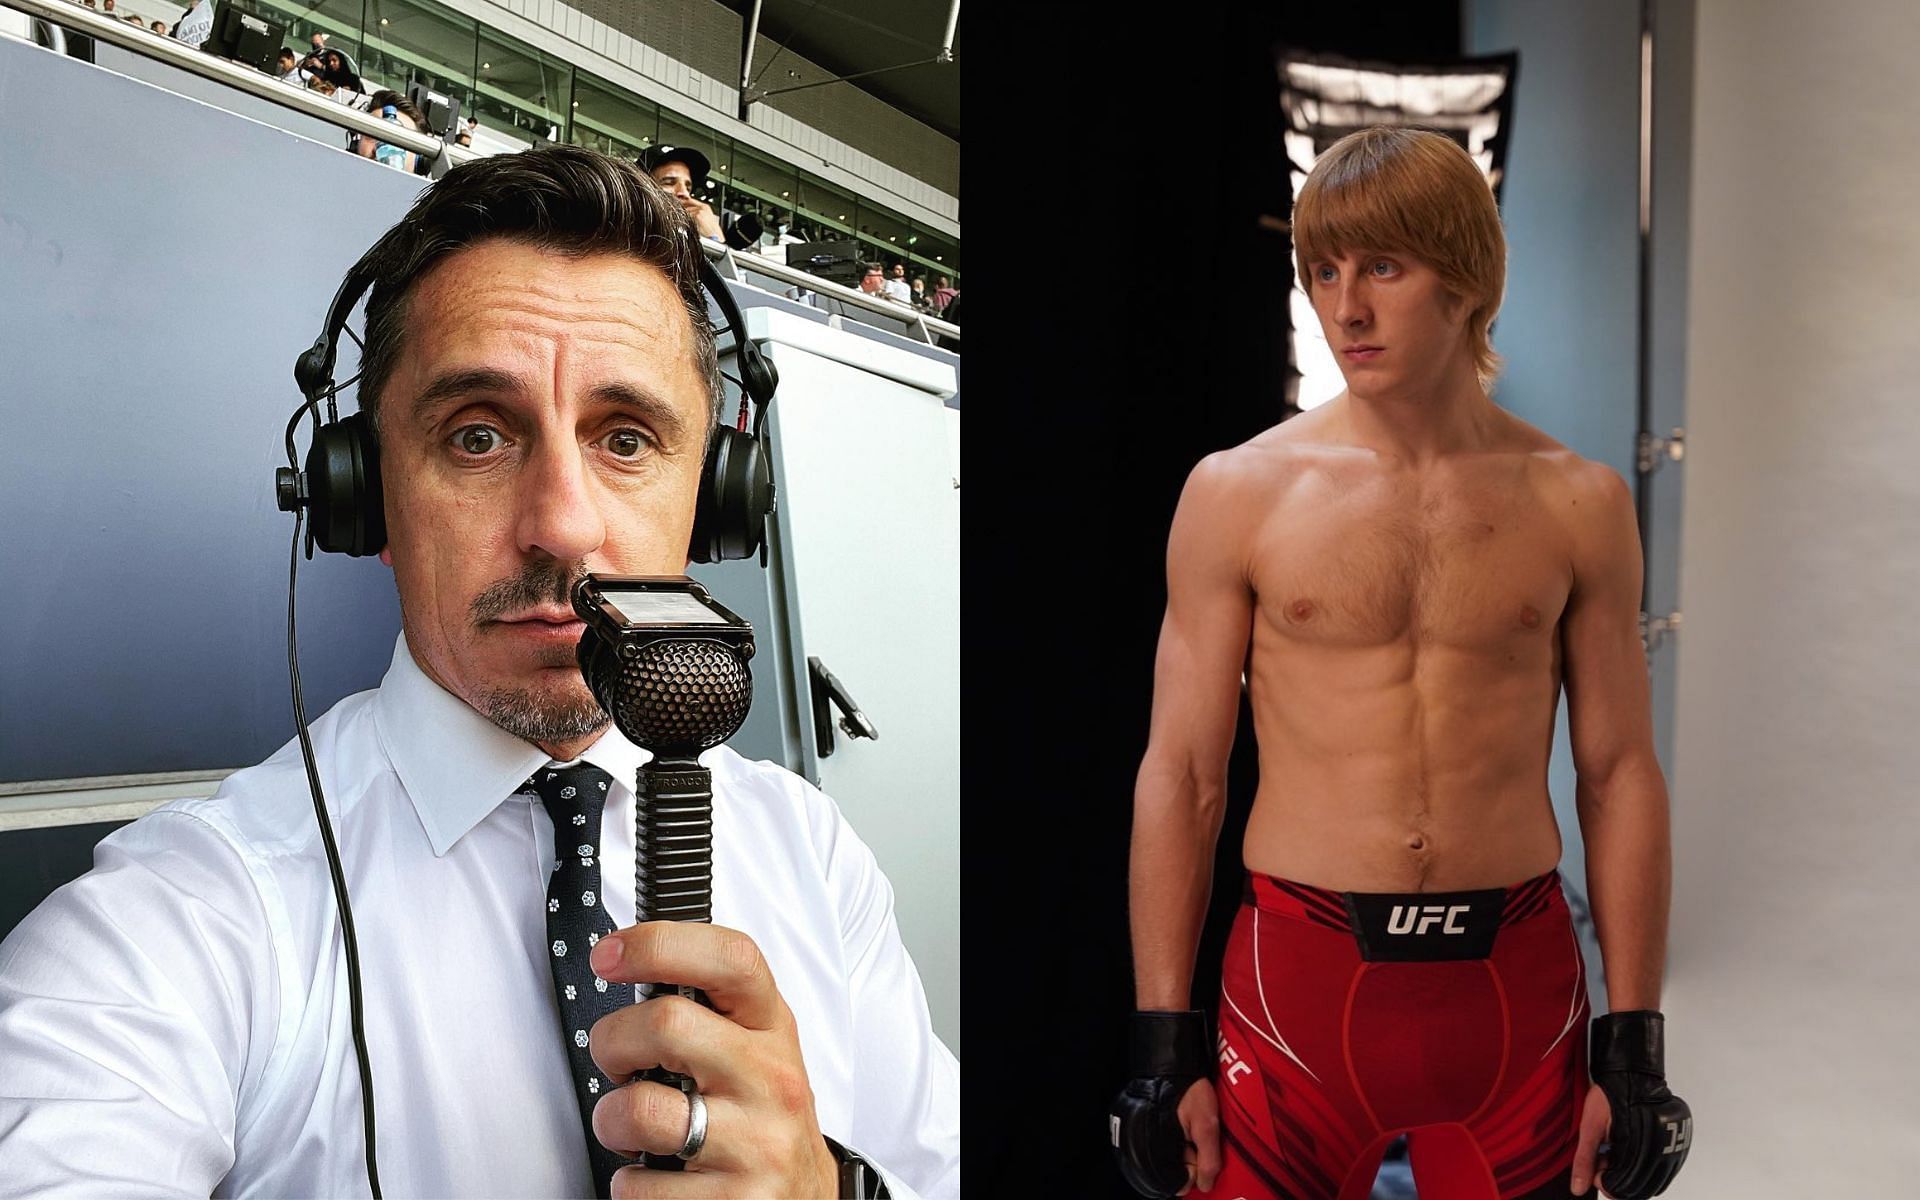 Gary Neville (left), Paddy Pimblett (right) [Images via @gneville2 and @theufcbaddy on Instagram]